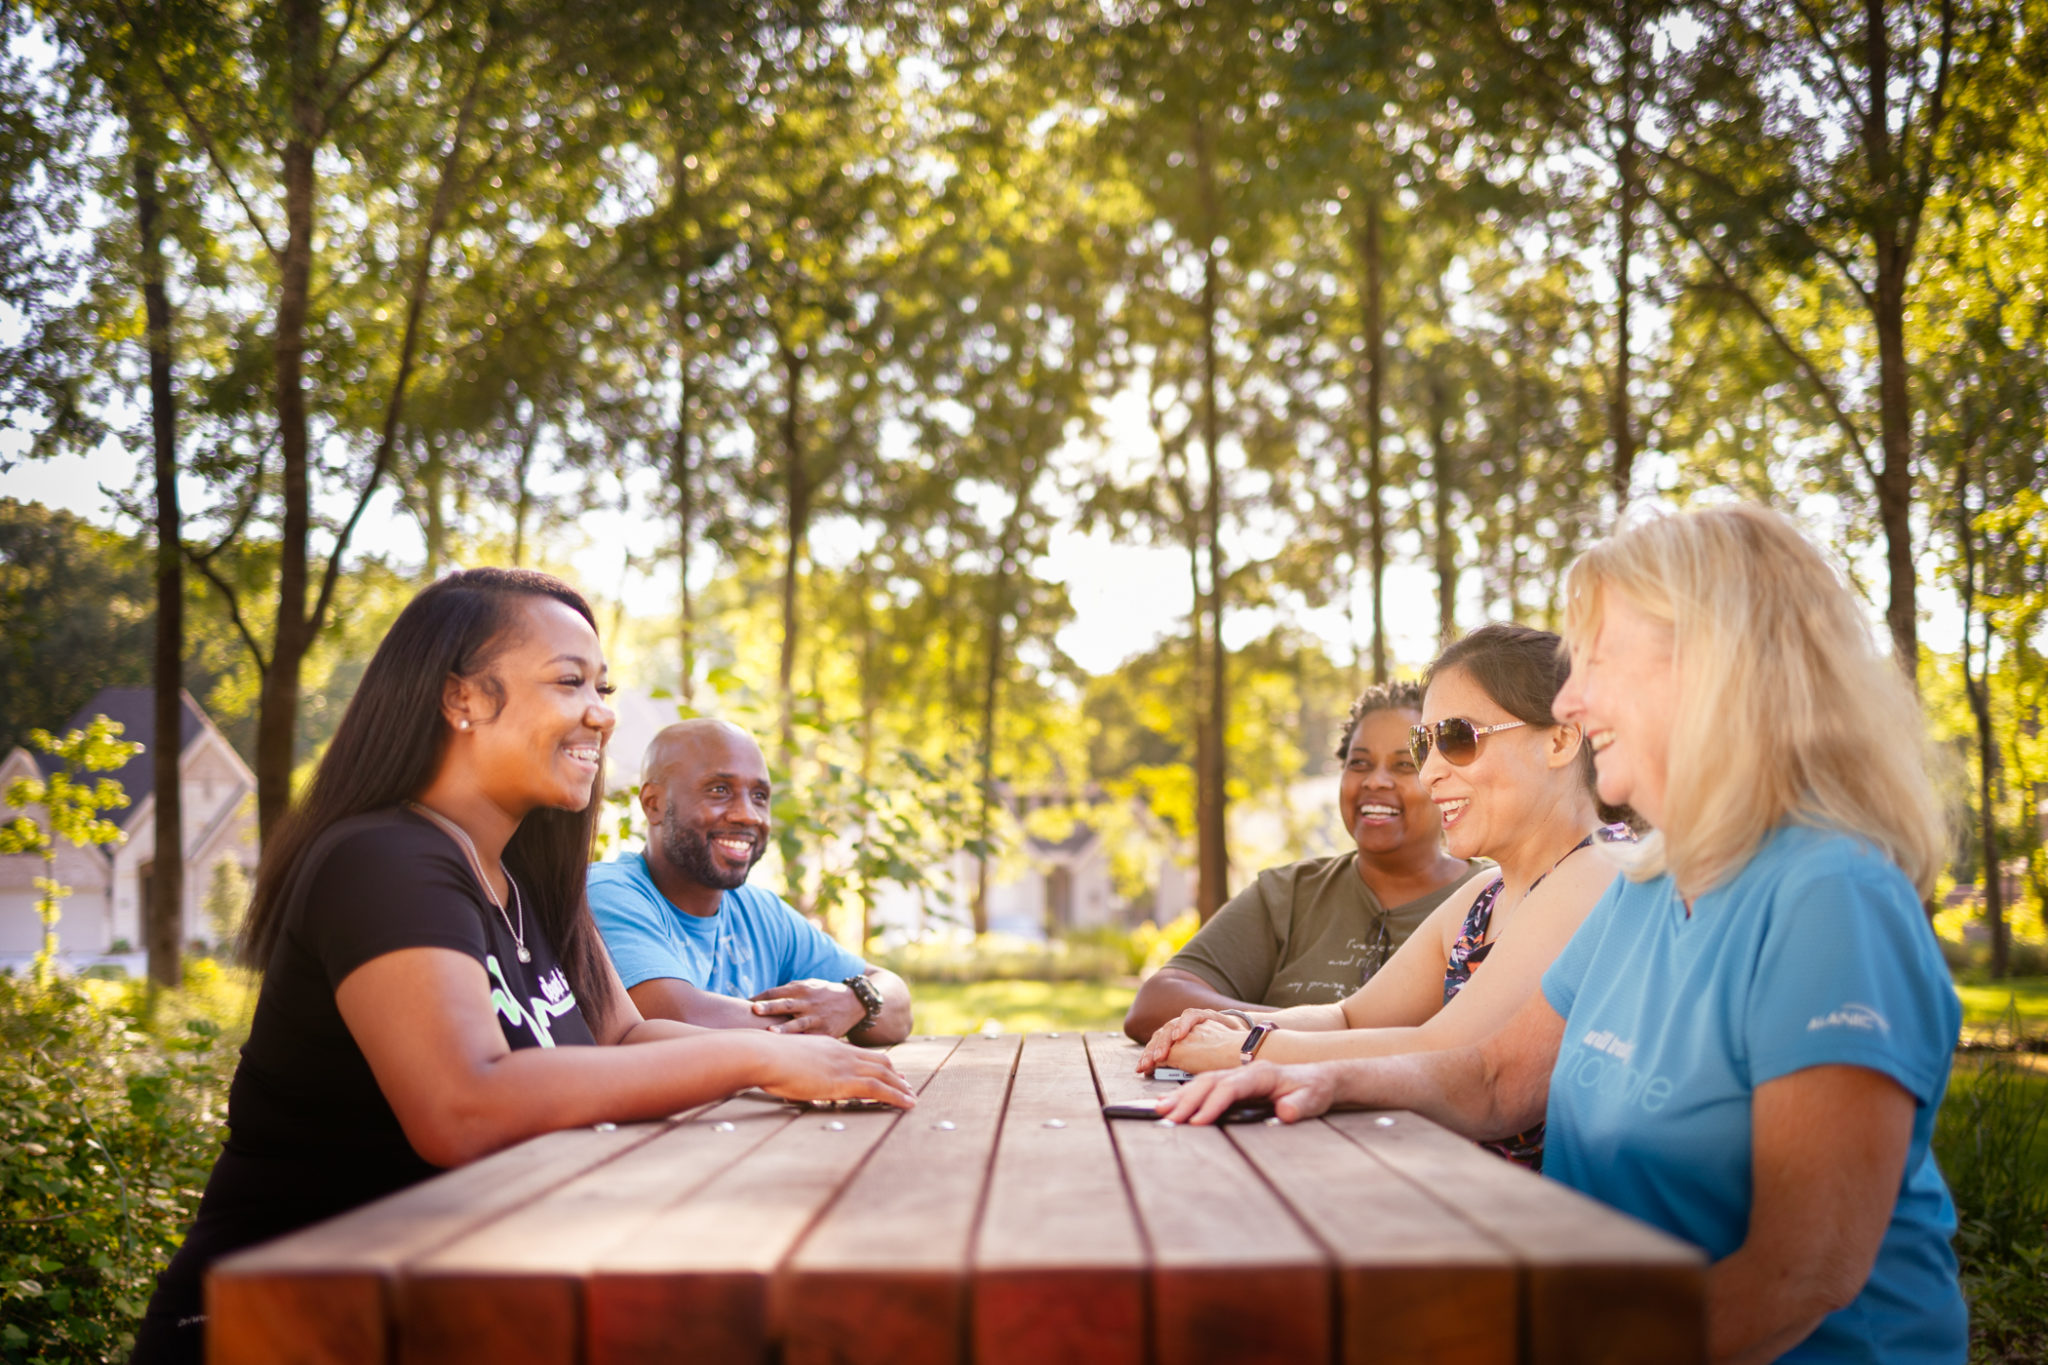 Enjoy time socializing with neighbors after your workout at one of the picnic tables in Circuit Park.